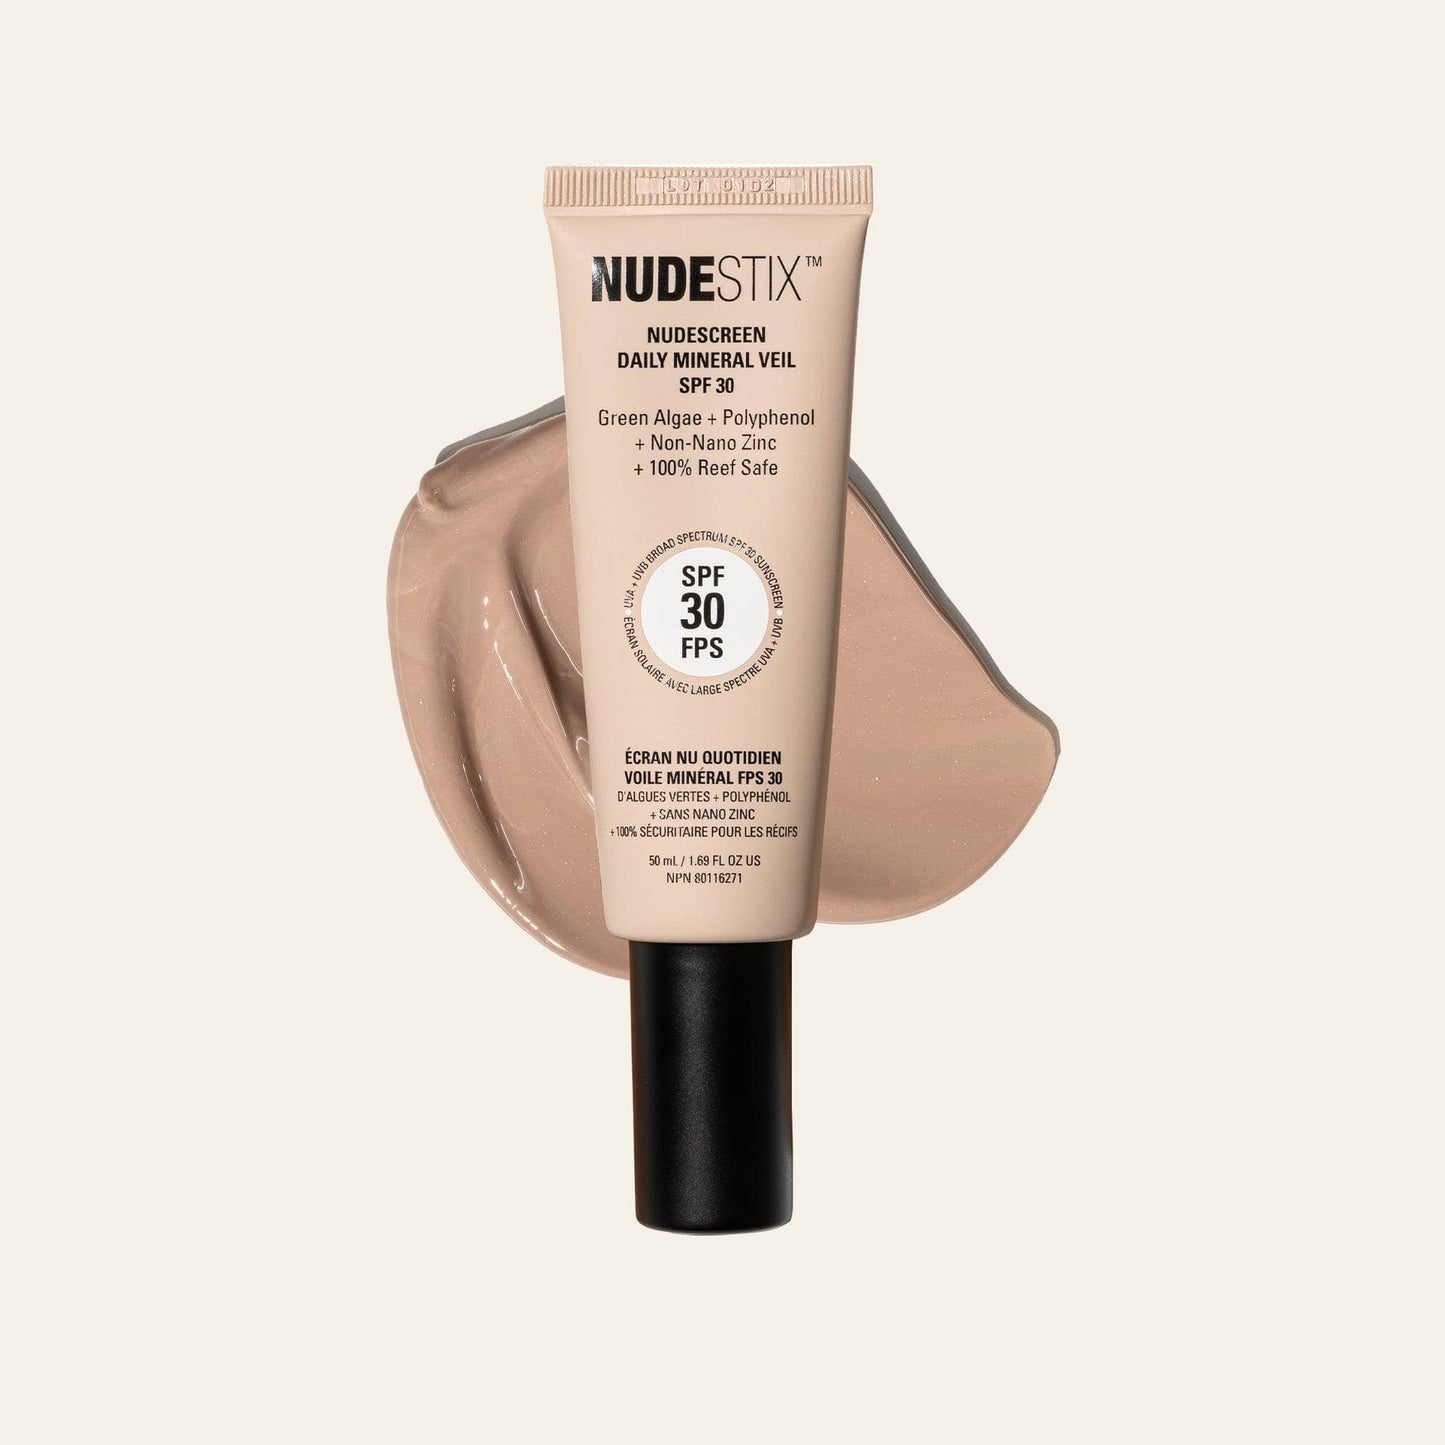 Nudescreen SPF Moisturizer in shade Nude with texture swatch